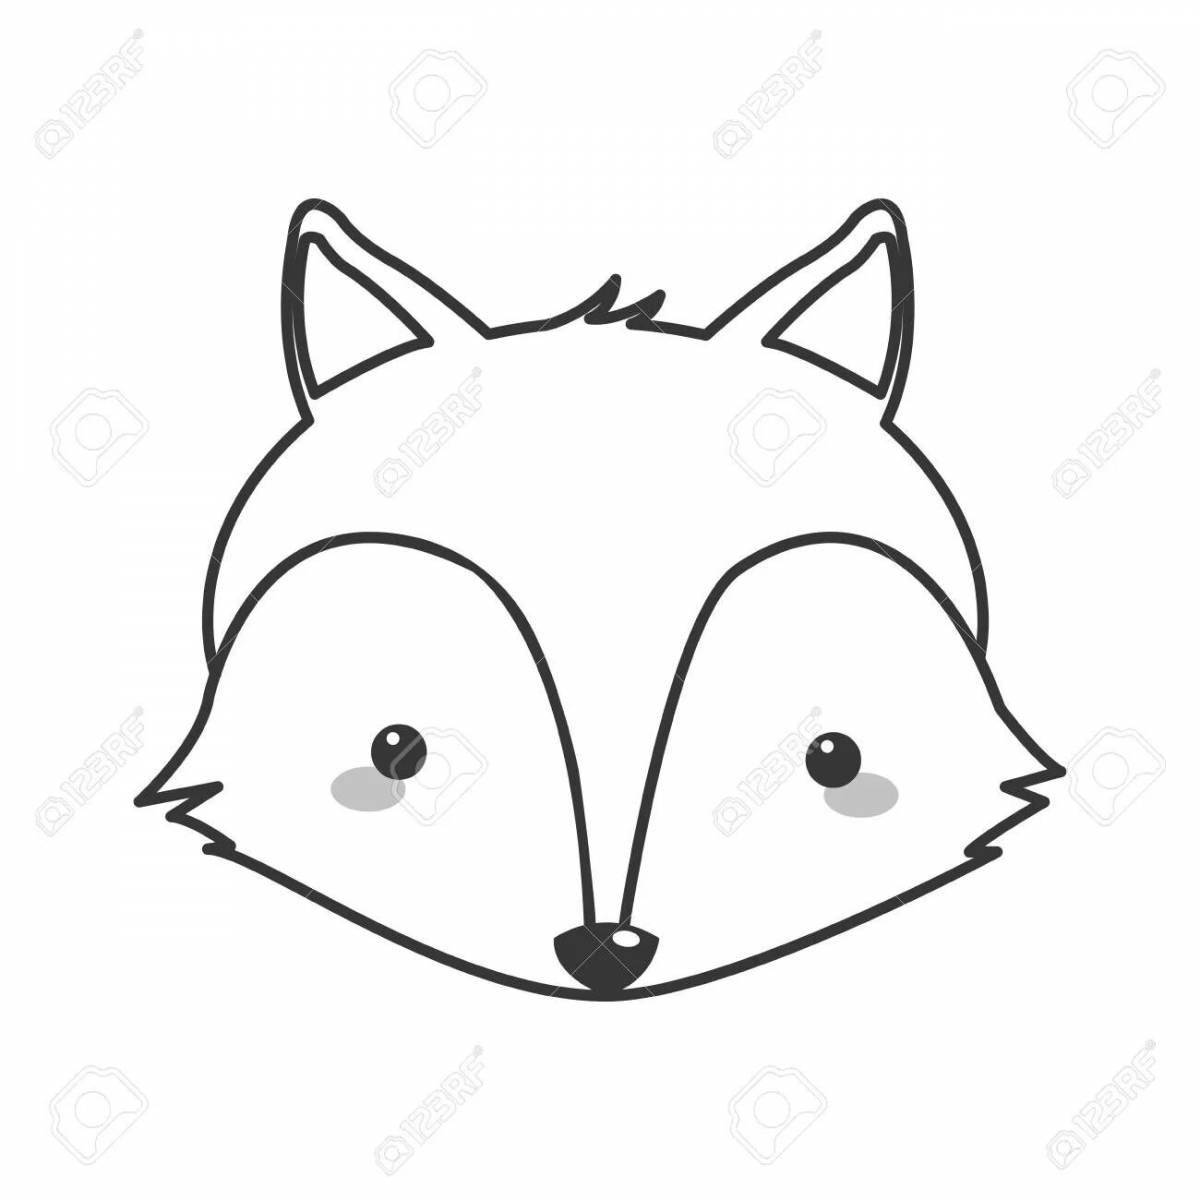 Coloring book of a fascinating muzzle of a fox